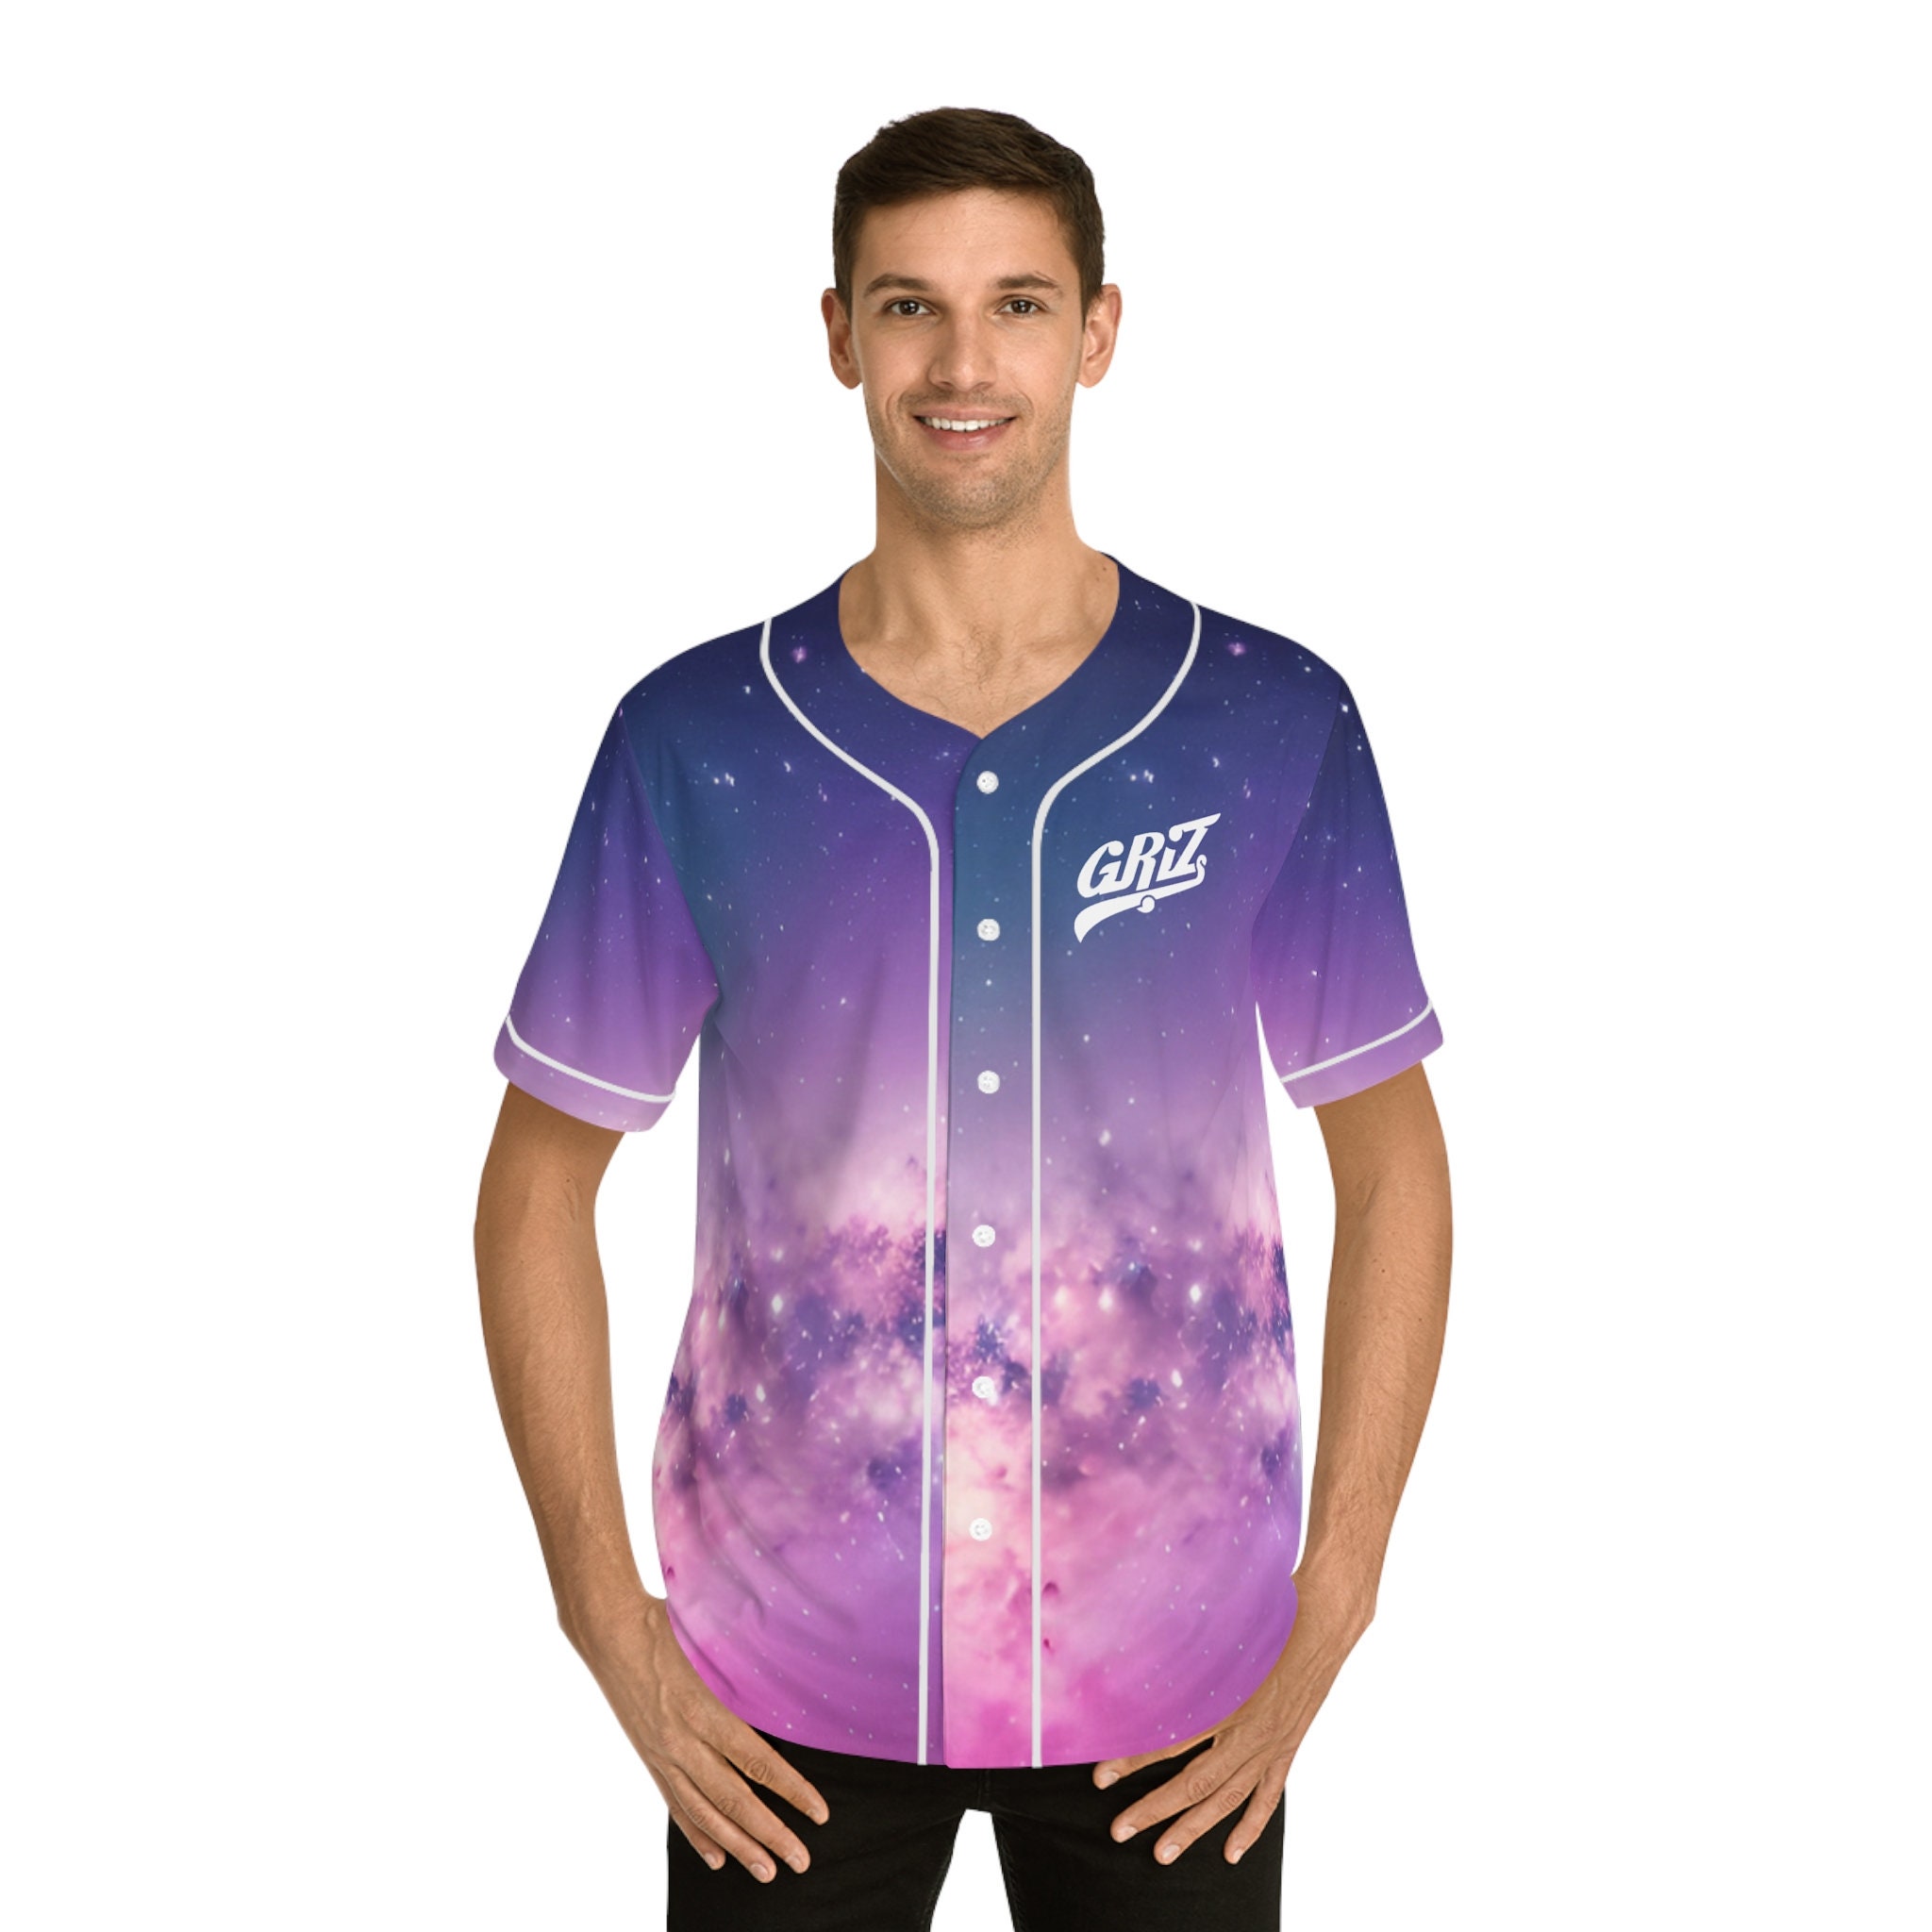 Griz Jersey with Drip Hood, Rave Jersey